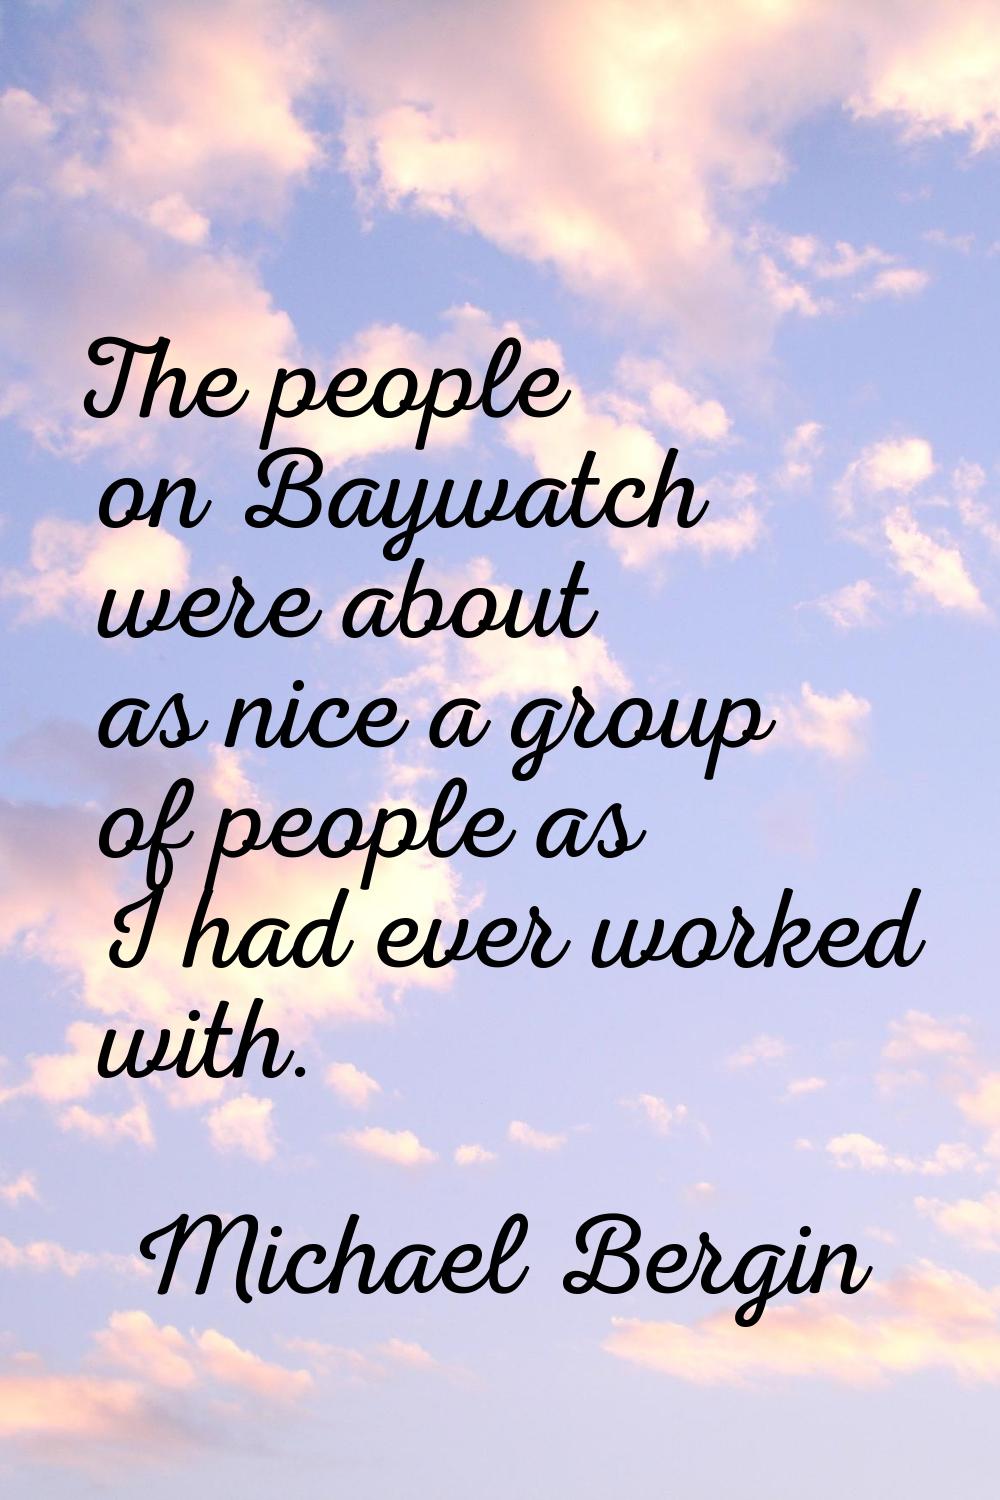 The people on Baywatch were about as nice a group of people as I had ever worked with.